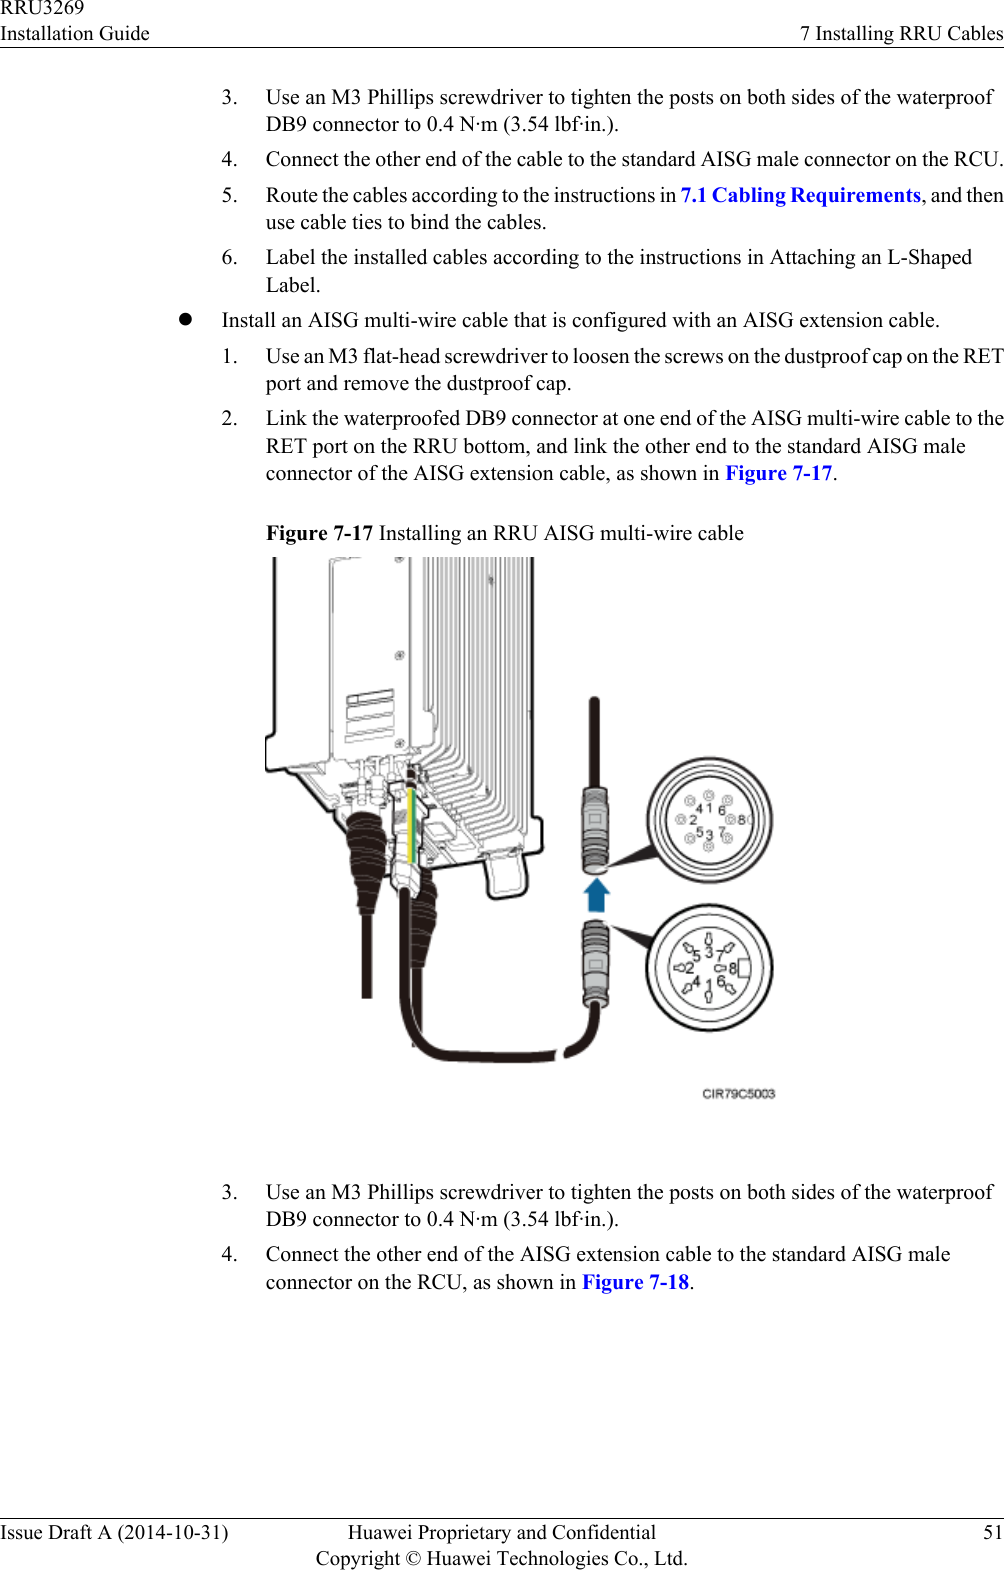 3. Use an M3 Phillips screwdriver to tighten the posts on both sides of the waterproofDB9 connector to 0.4 N·m (3.54 lbf·in.).4. Connect the other end of the cable to the standard AISG male connector on the RCU.5. Route the cables according to the instructions in 7.1 Cabling Requirements, and thenuse cable ties to bind the cables.6. Label the installed cables according to the instructions in Attaching an L-ShapedLabel.lInstall an AISG multi-wire cable that is configured with an AISG extension cable.1. Use an M3 flat-head screwdriver to loosen the screws on the dustproof cap on the RETport and remove the dustproof cap.2. Link the waterproofed DB9 connector at one end of the AISG multi-wire cable to theRET port on the RRU bottom, and link the other end to the standard AISG maleconnector of the AISG extension cable, as shown in Figure 7-17.Figure 7-17 Installing an RRU AISG multi-wire cable 3. Use an M3 Phillips screwdriver to tighten the posts on both sides of the waterproofDB9 connector to 0.4 N·m (3.54 lbf·in.).4. Connect the other end of the AISG extension cable to the standard AISG maleconnector on the RCU, as shown in Figure 7-18.RRU3269Installation Guide 7 Installing RRU CablesIssue Draft A (2014-10-31) Huawei Proprietary and ConfidentialCopyright © Huawei Technologies Co., Ltd.51